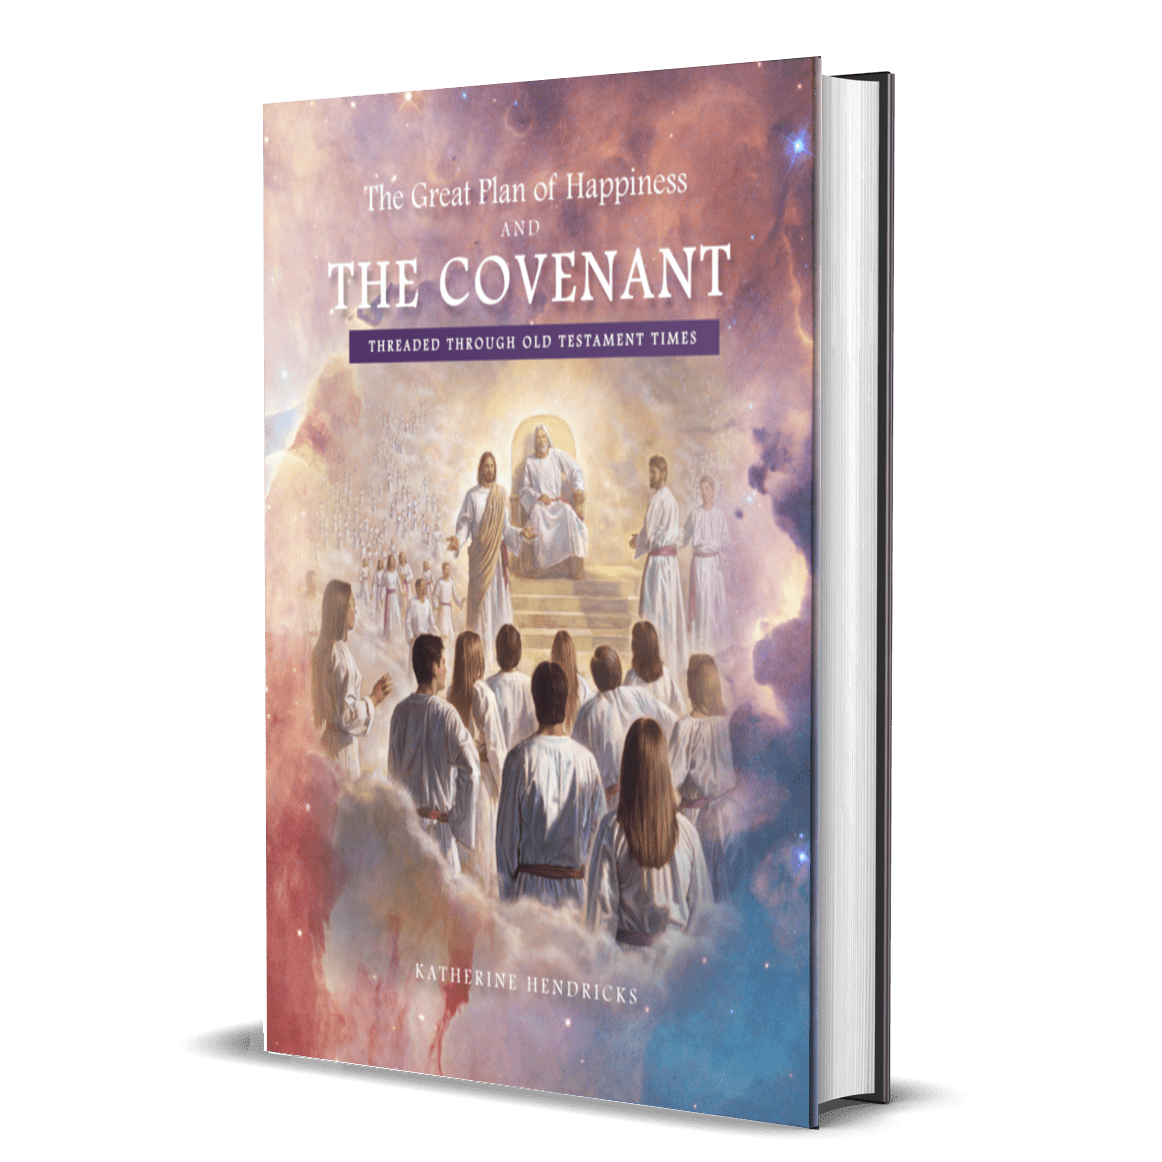 The Great Plan of Happiness and the Covenant